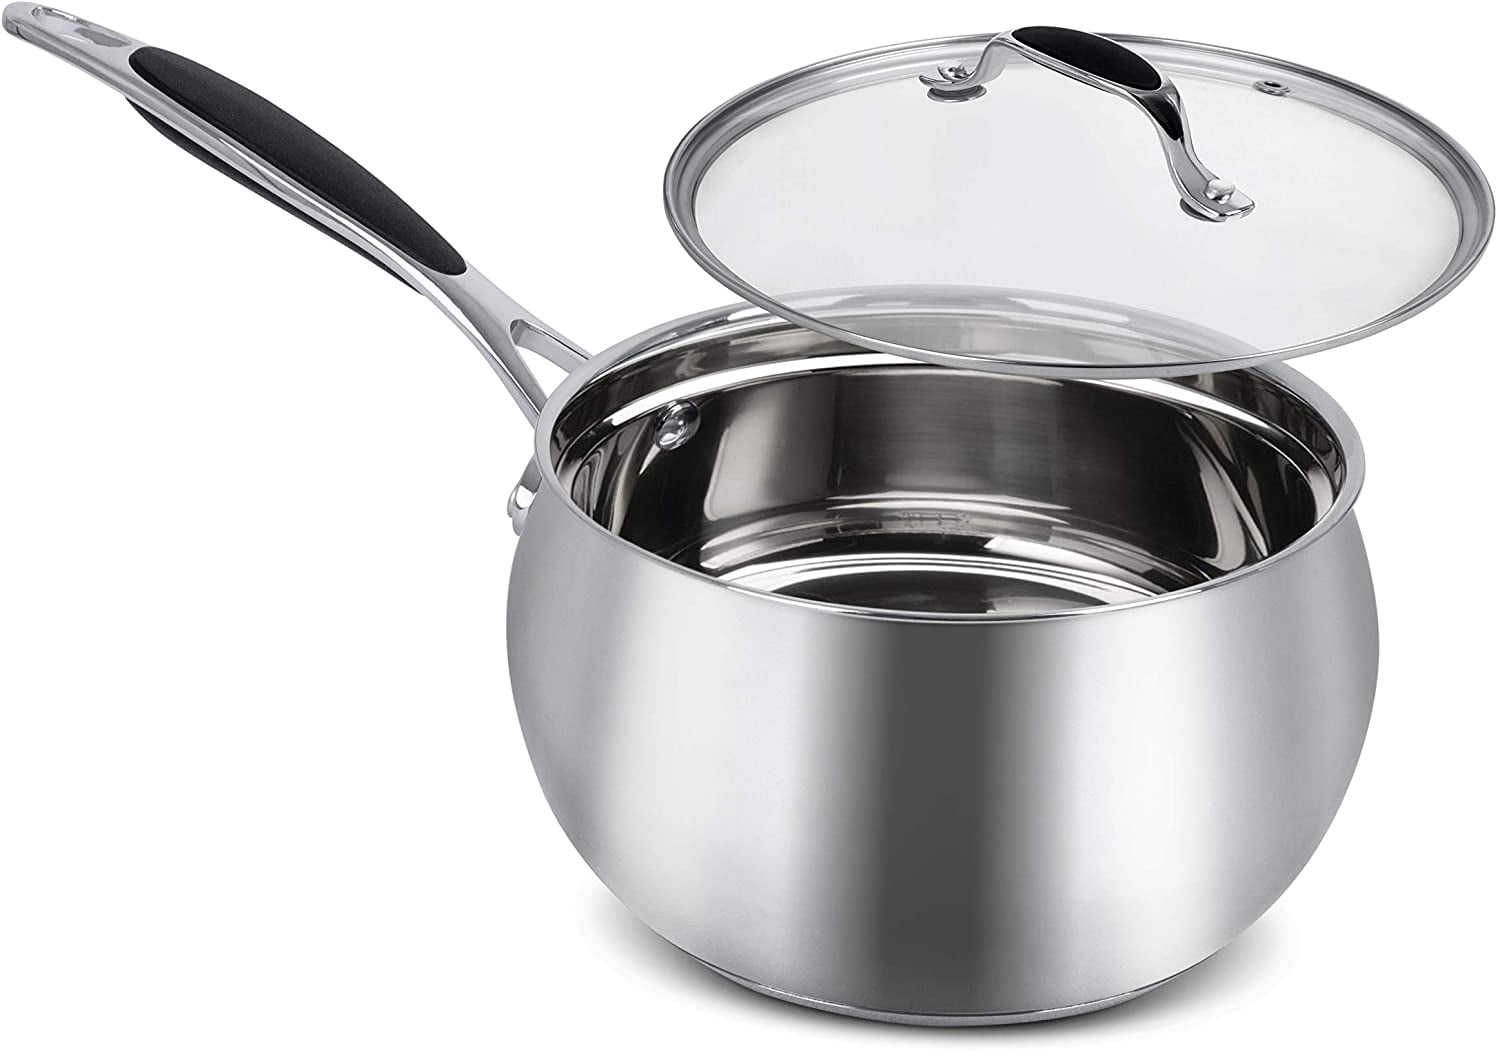 Elitra Stainless Steel Sauce Pan, 3 Quart, Silver 